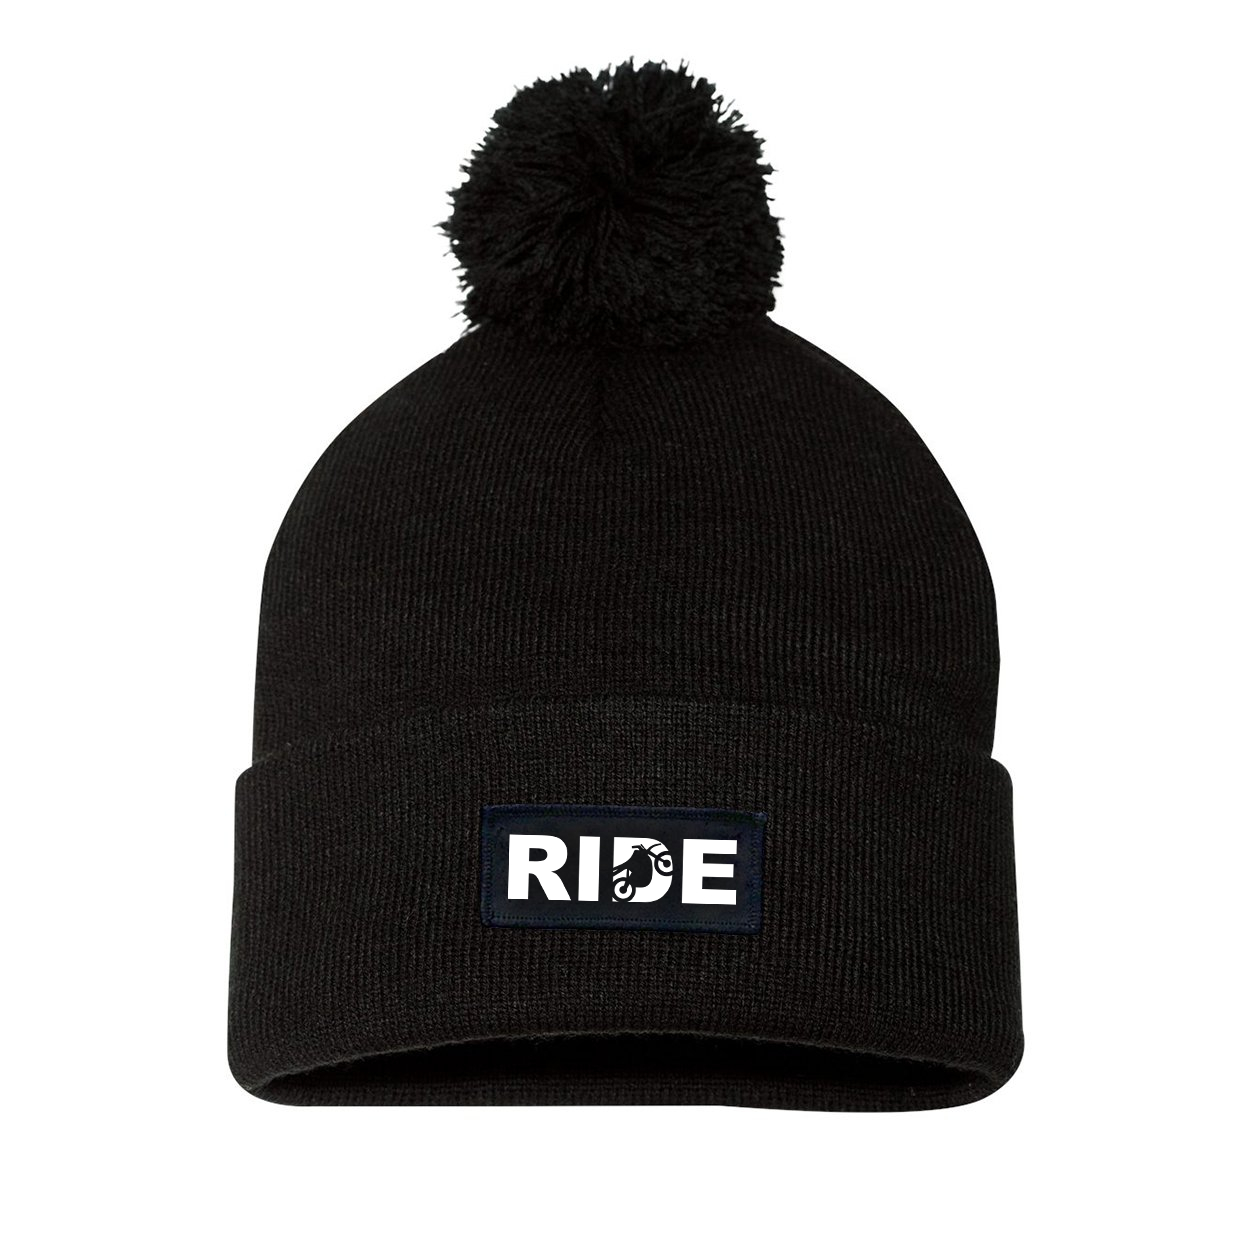 Ride Moto Logo Night Out Woven Patch Roll Up Pom Knit Beanie Black (White Logo)